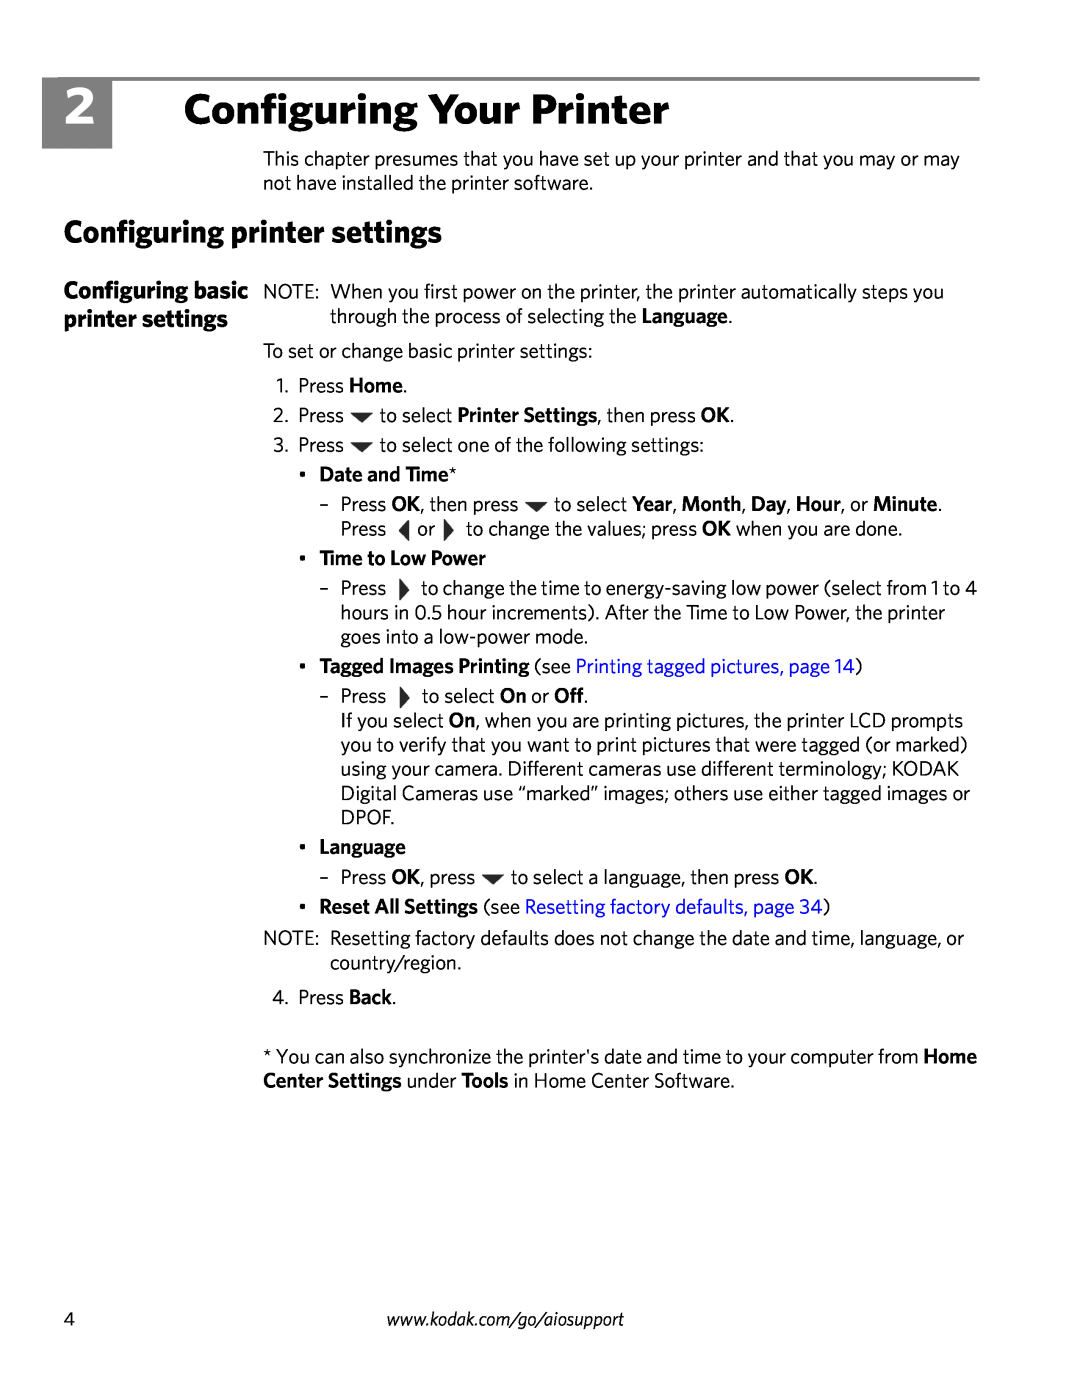 Kodak ESP 3200 Series Configuring Your Printer, Configuring printer settings, Date and Time, Time to Low Power, Language 